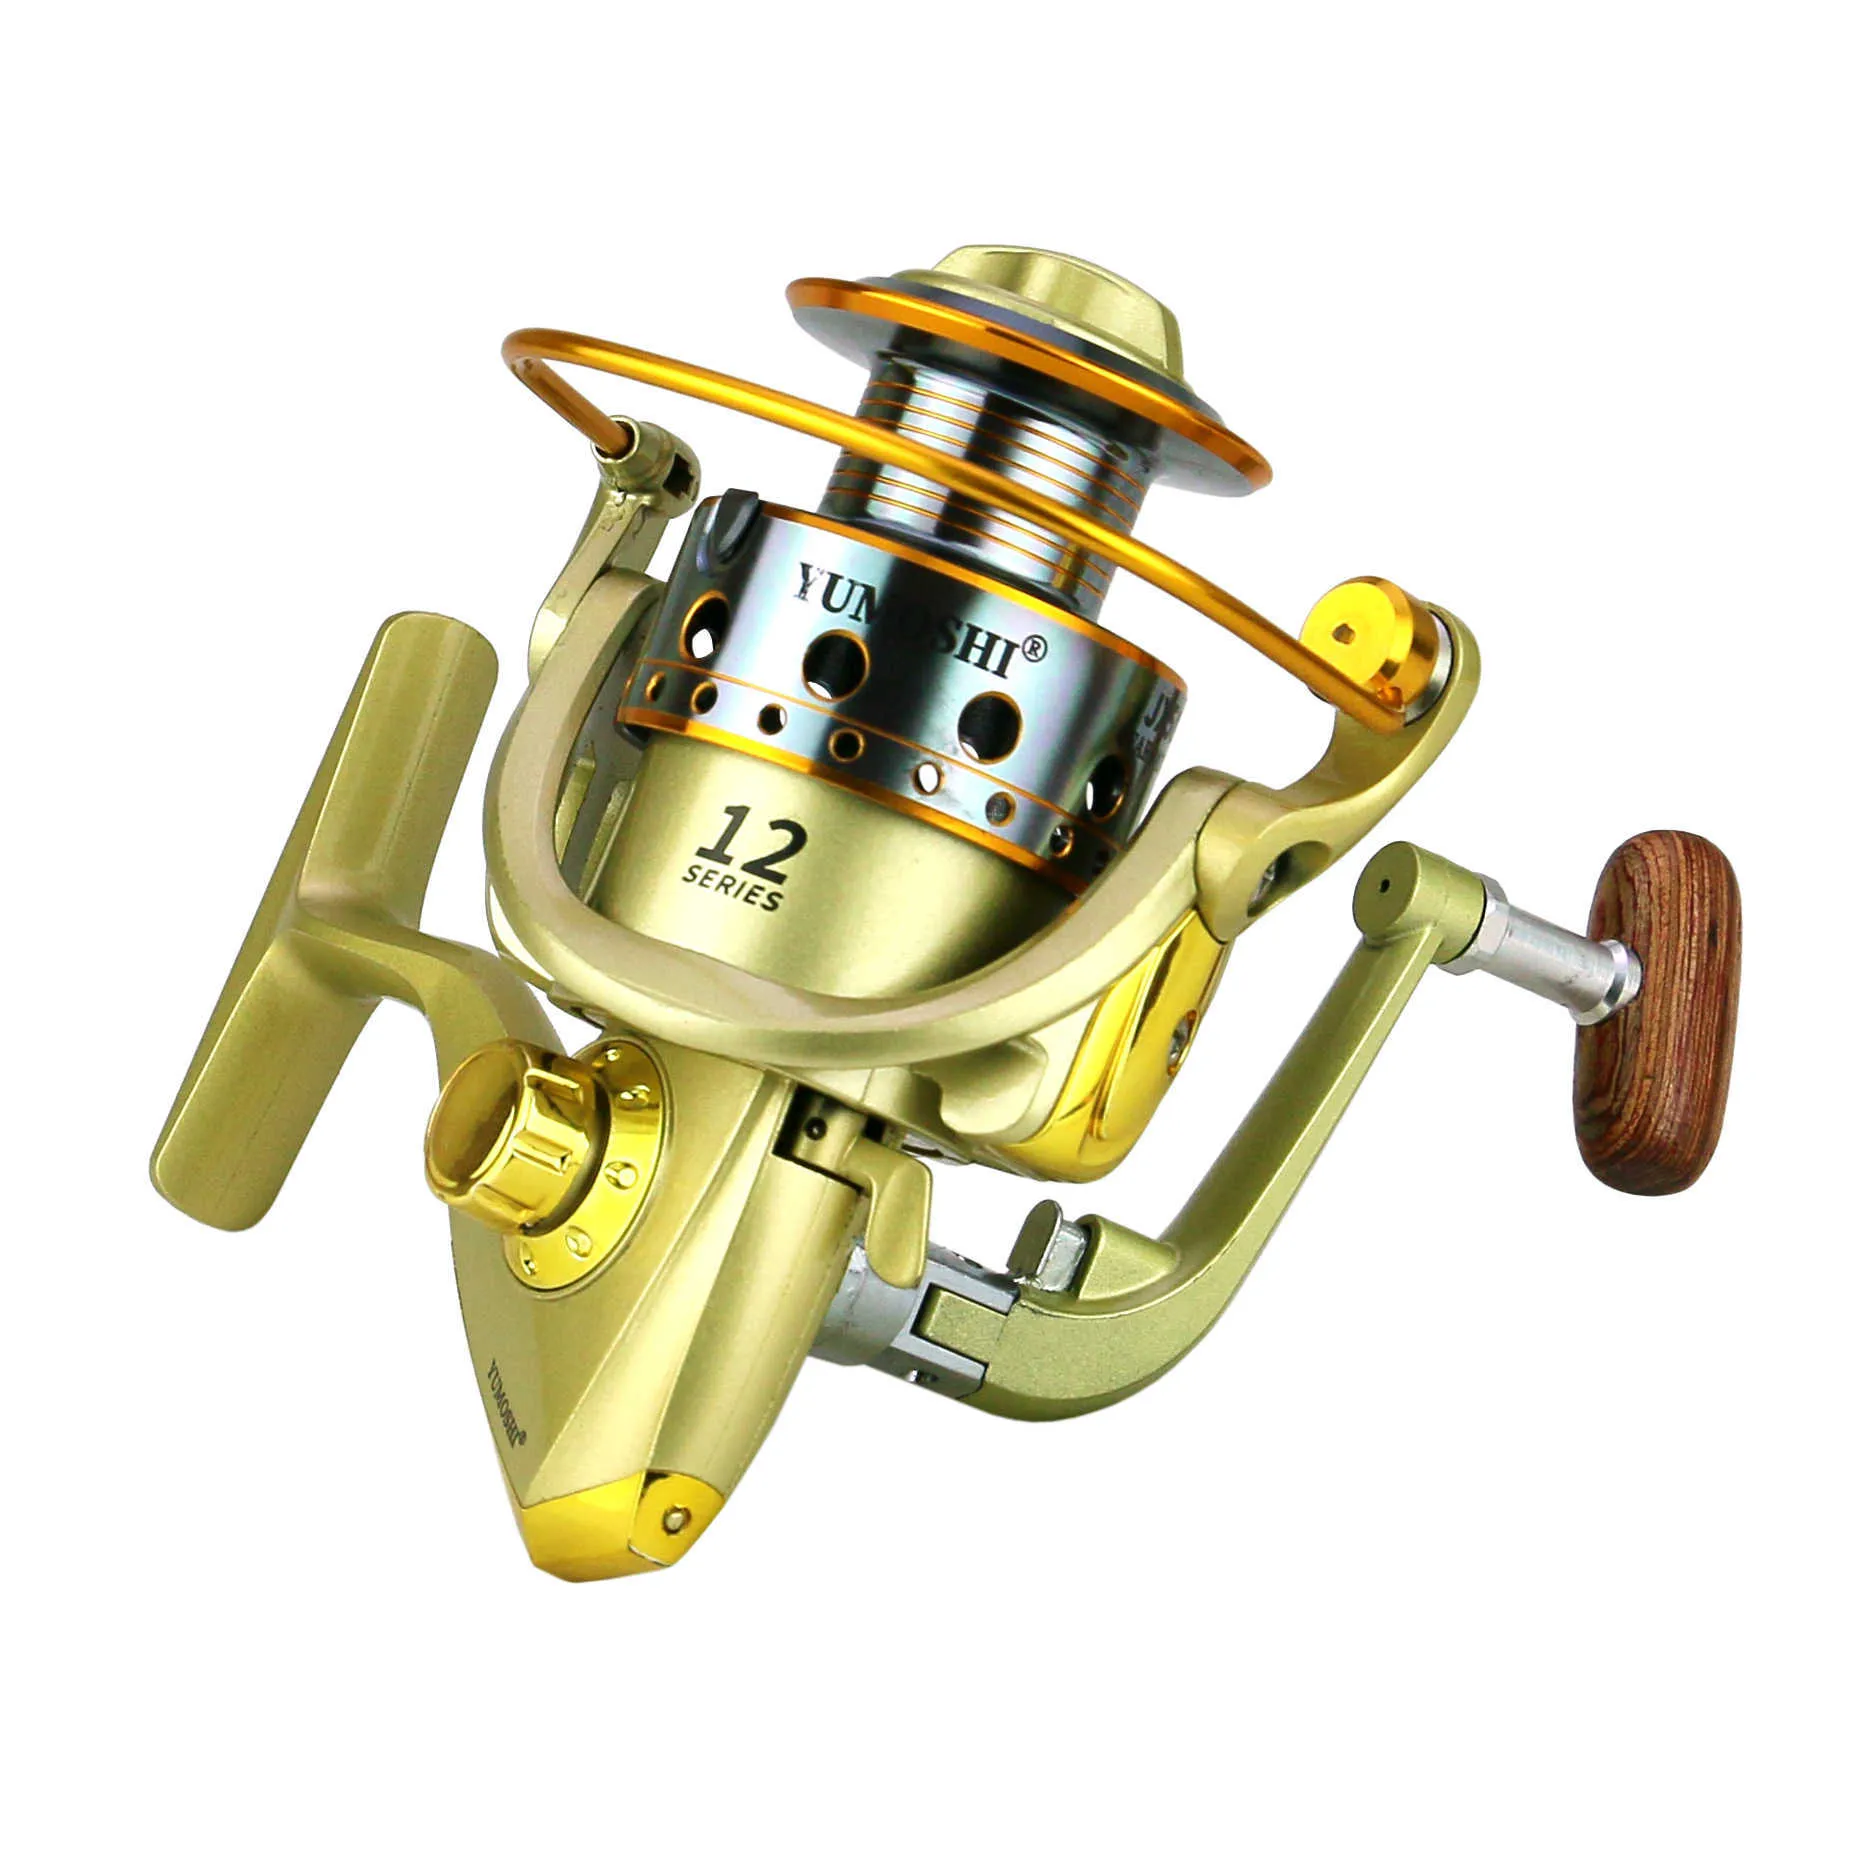 JOSBY JX 1000 7000 Series Bait Casting Reel High Speed Brass Metal Wire,  12KG Maximum Drag For Salt Water Truck Fishing Gear P230529 From  Mengyang10, $16.72